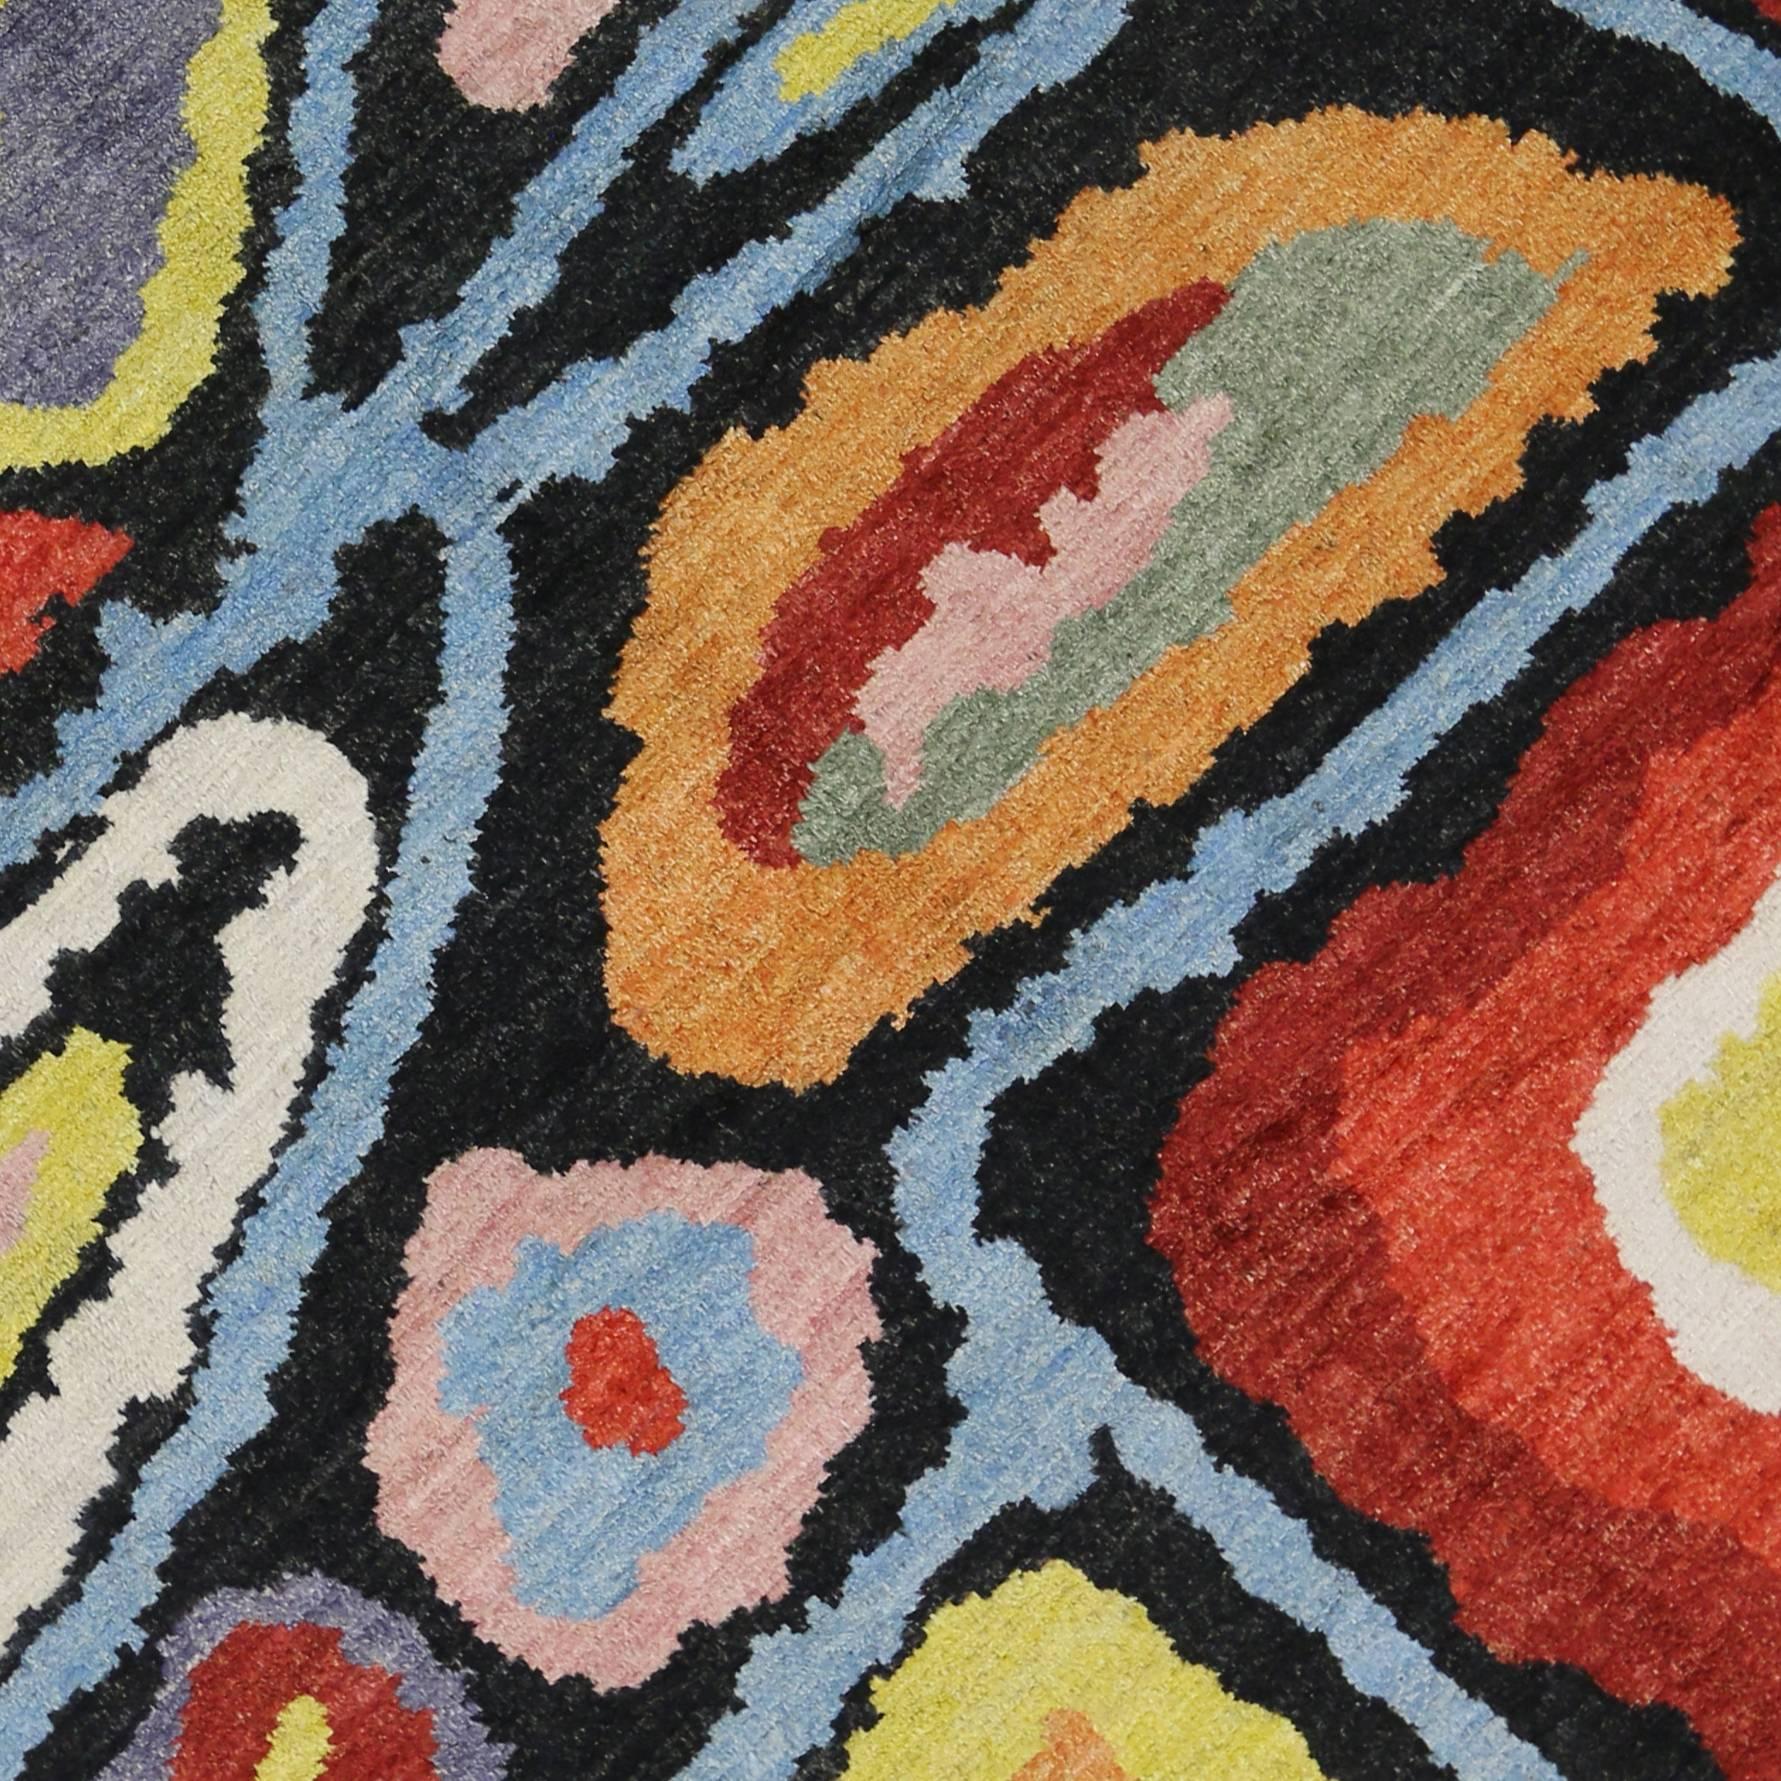 Pakistani New Colorful Contemporary Moroccan Orphism Rug Inspired by Robert Delaunay